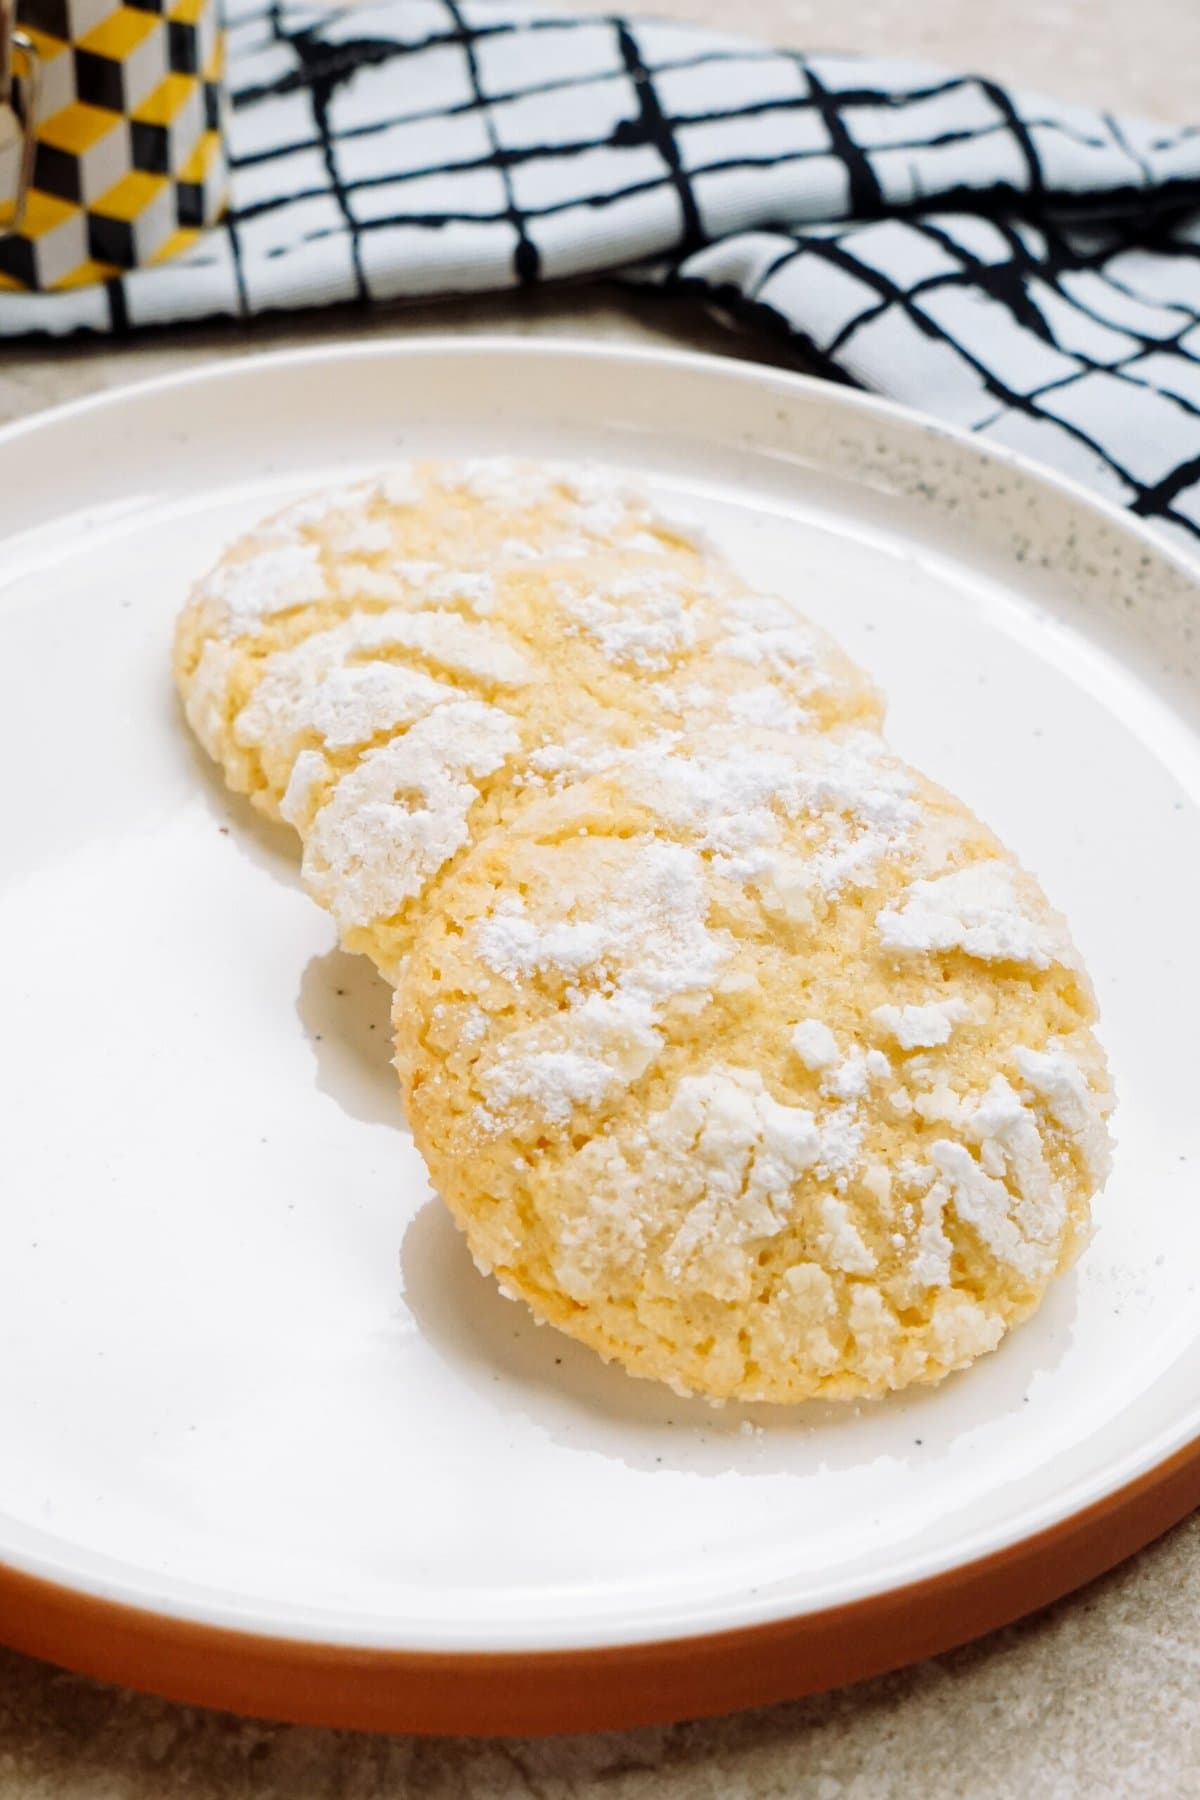 Three crinkle lemon cookies with powdered sugar on a white plate with a terracotta rim, accompanied by a black and white checked cloth.